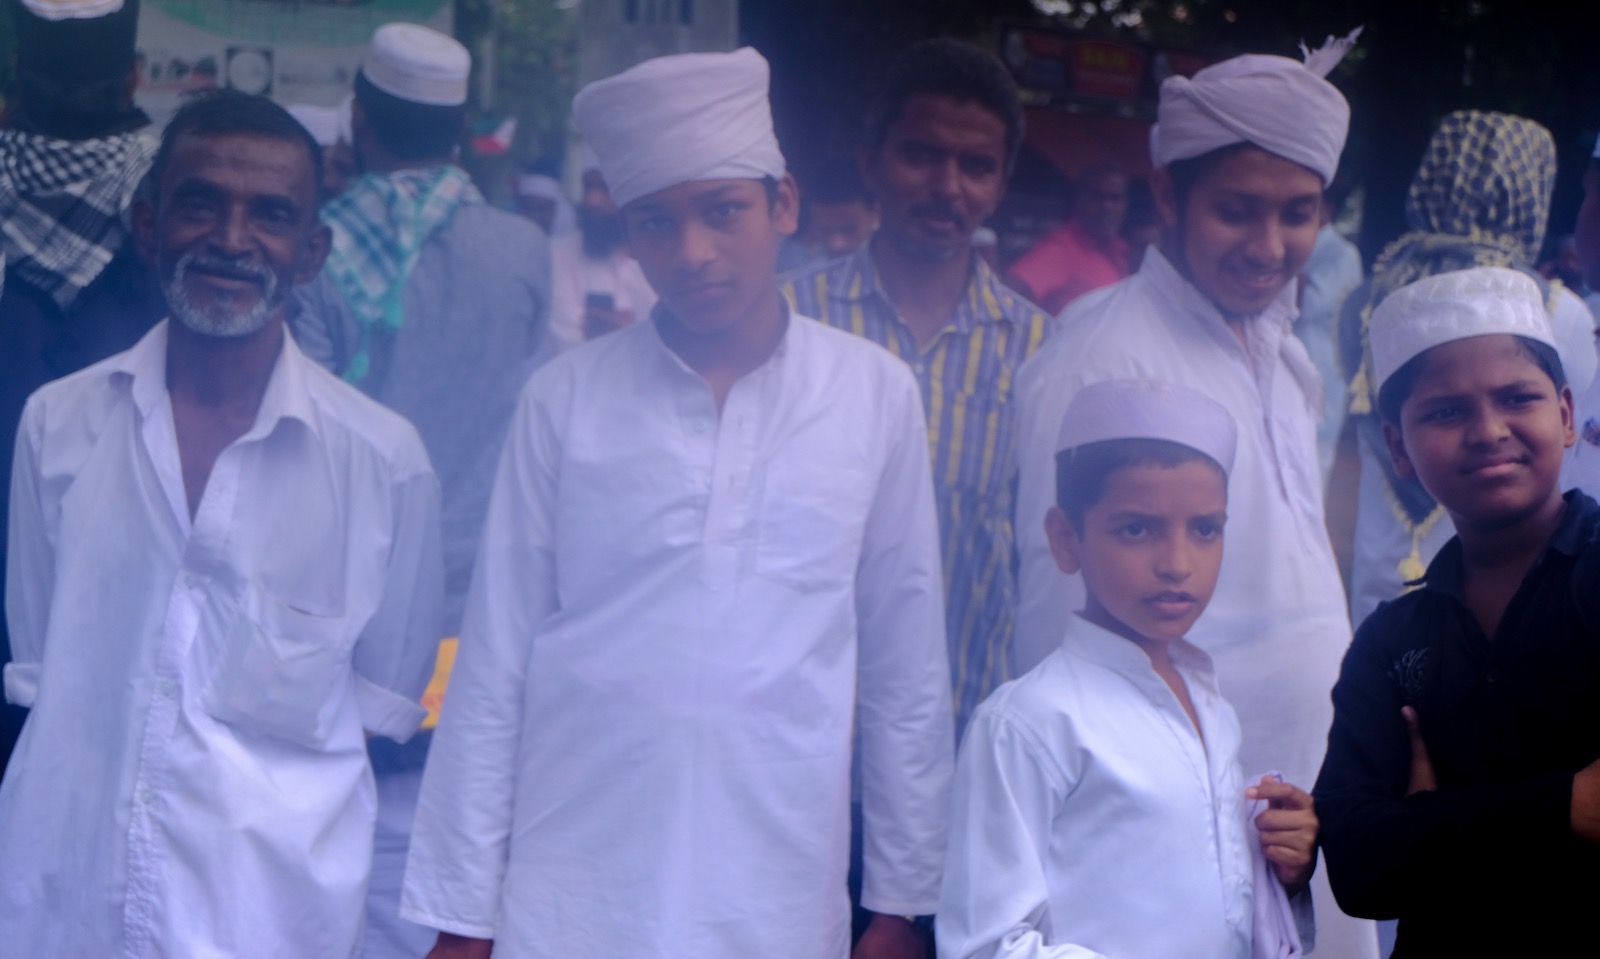 Muslim Youths in Trivandrum (Through a Misted-Up Lens)